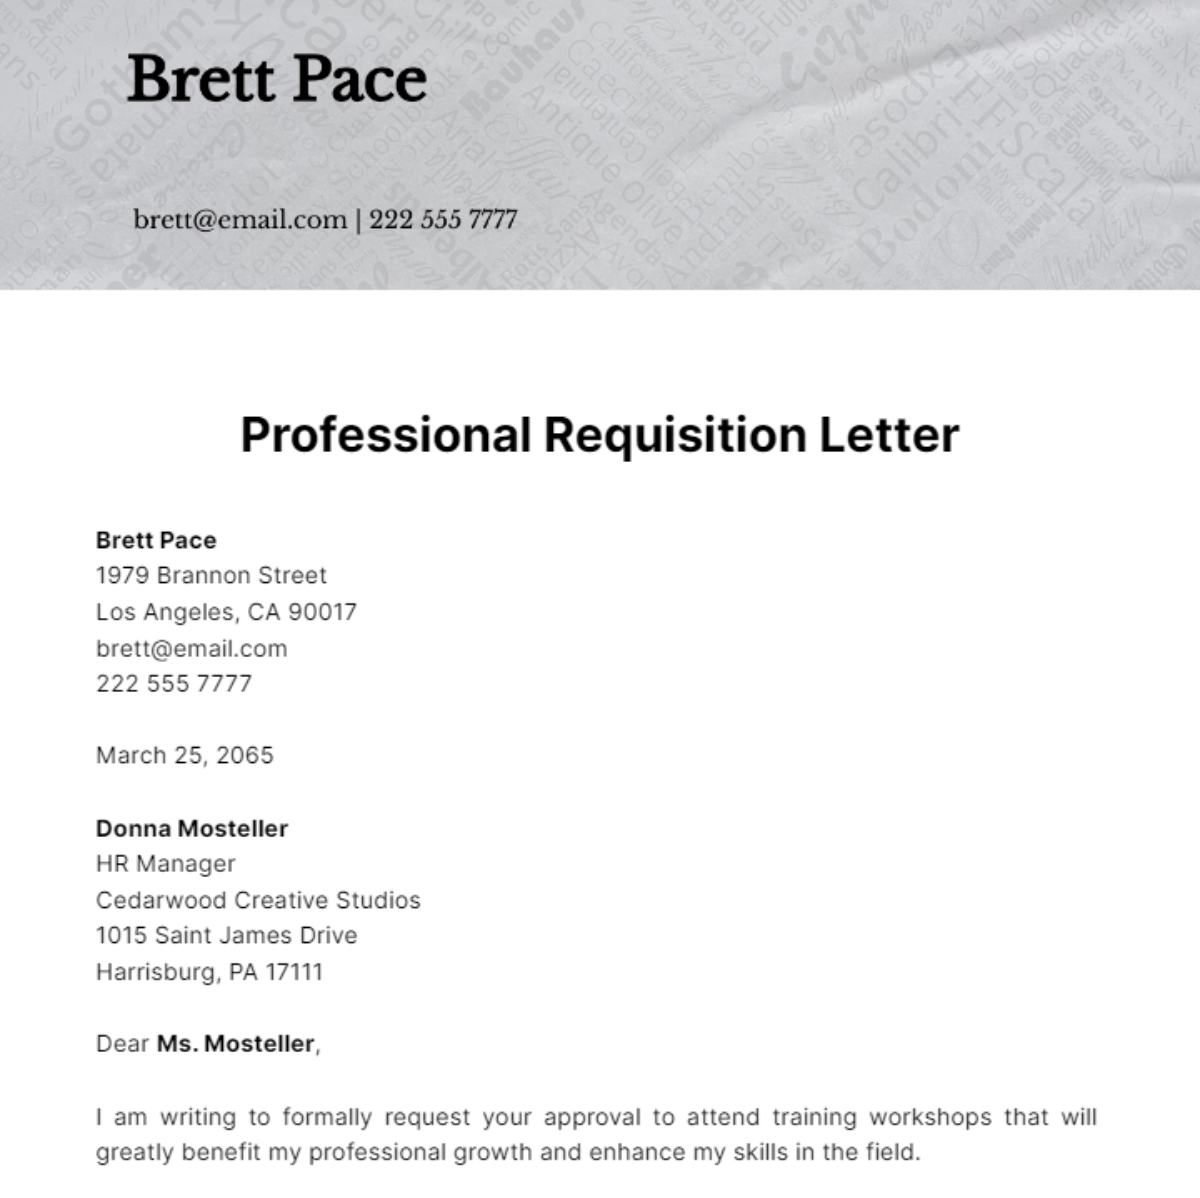 Professional Requisition Letter Template